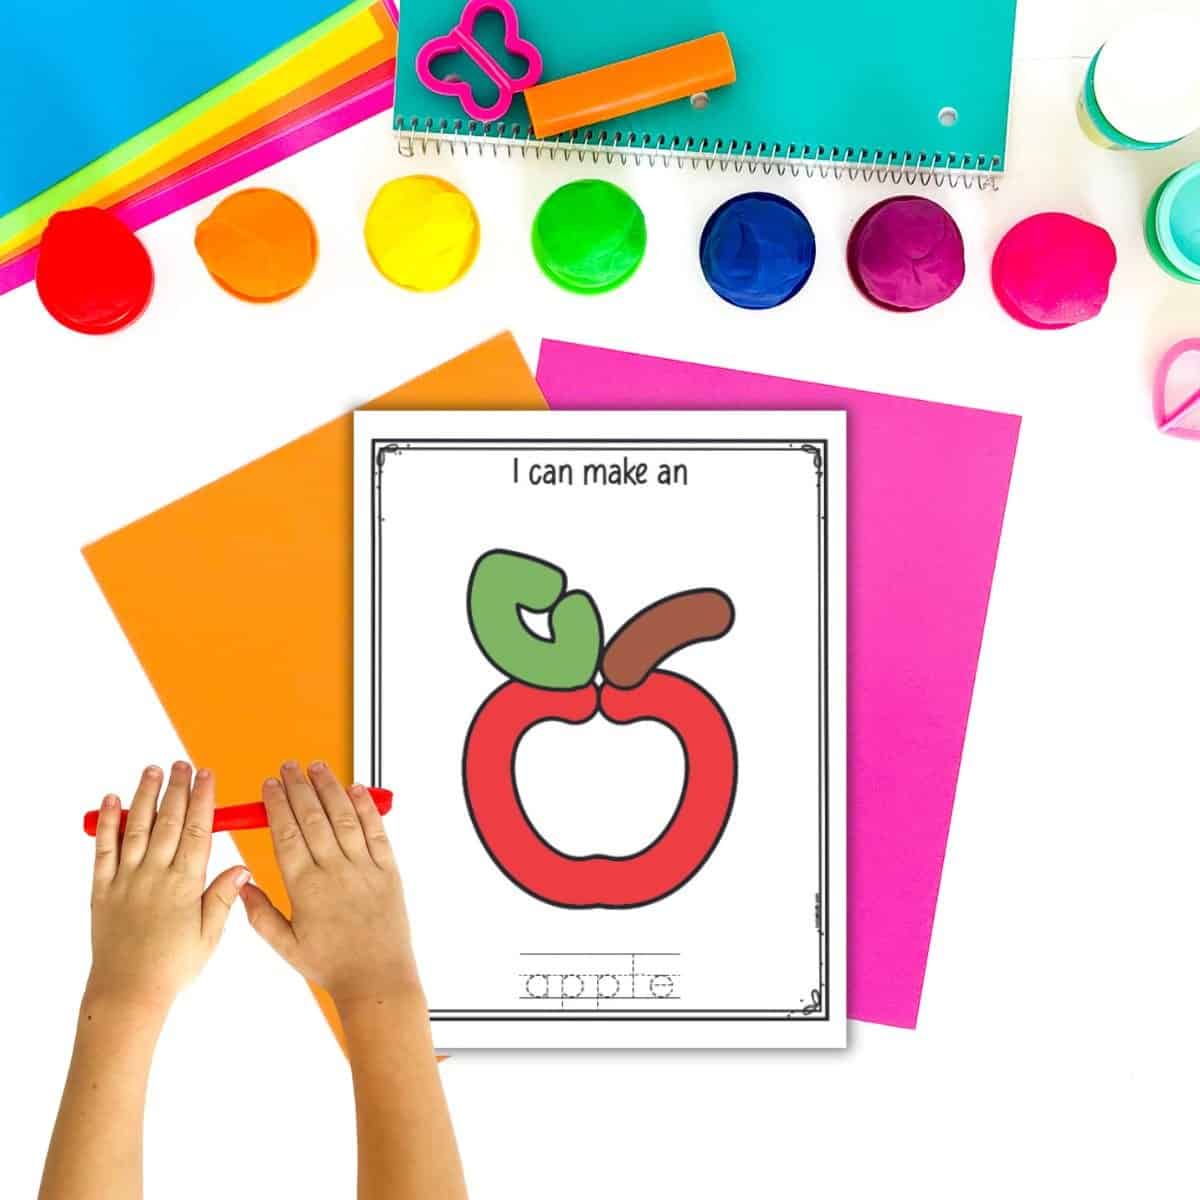 A top down image of paper and play dough with a child's hand rolling a snake of red play dough. A play dough activity mat with an apple is on top of other brightly colored pieces of paper.